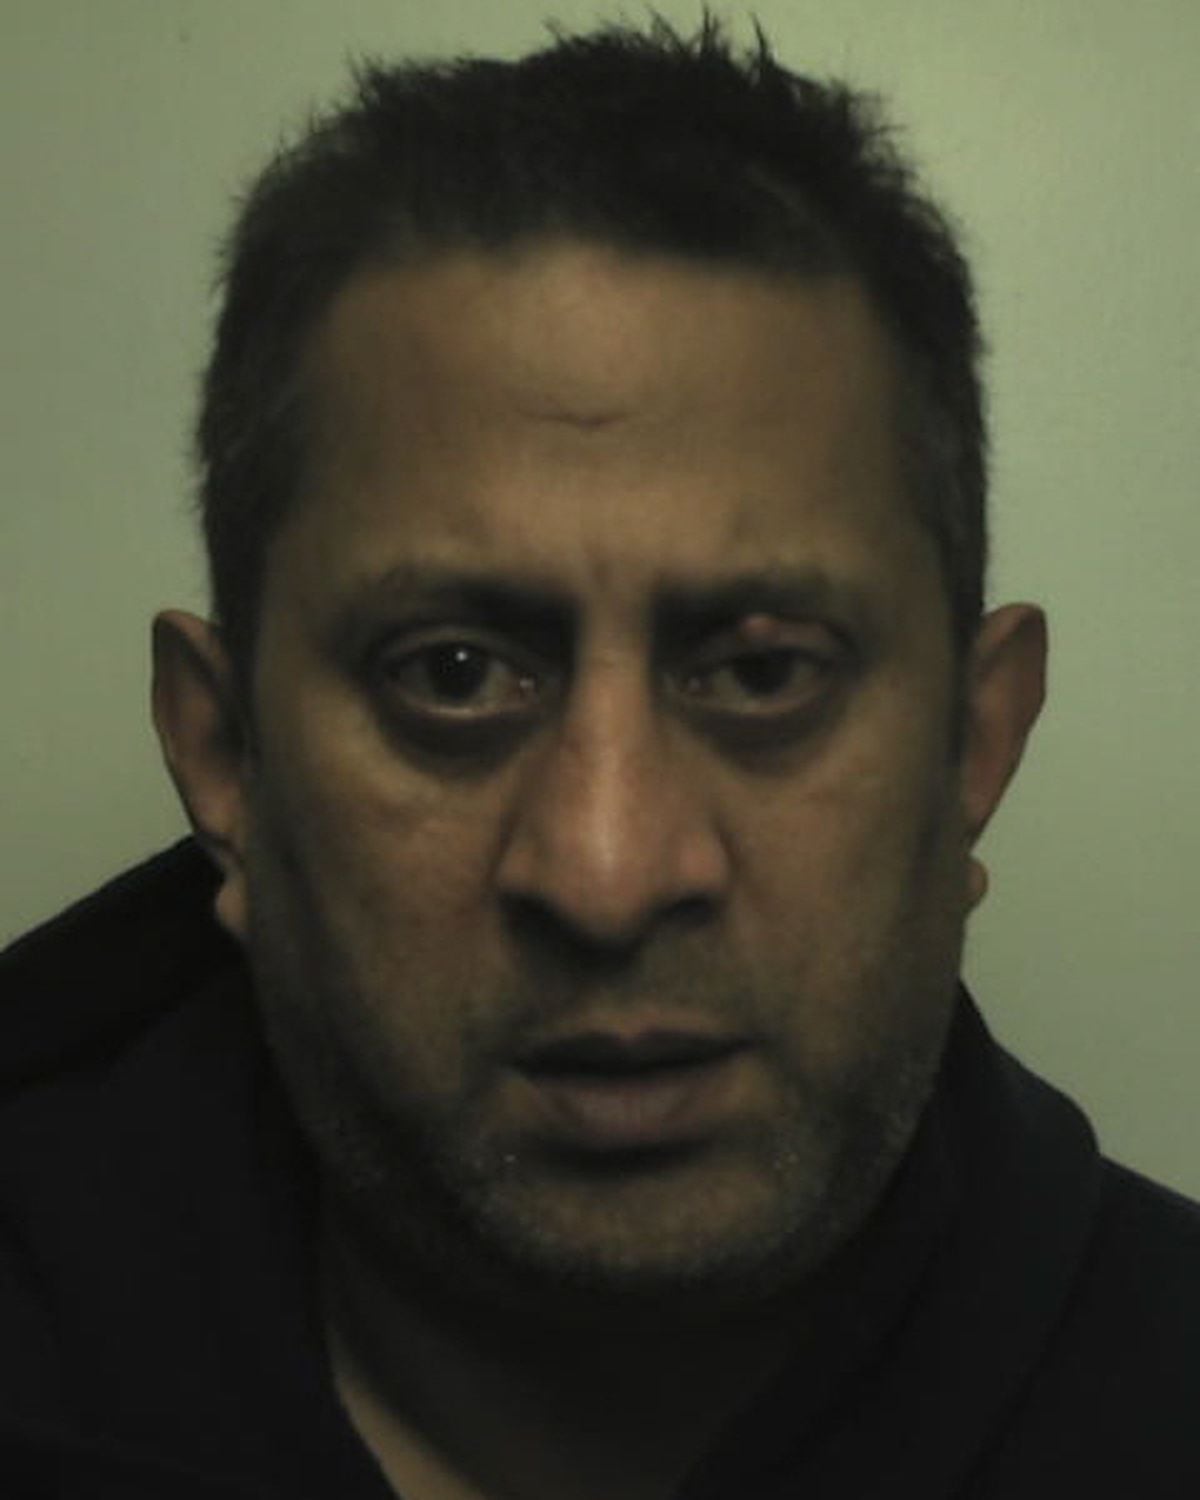 Harpreet Johal was jailed for five years and three months